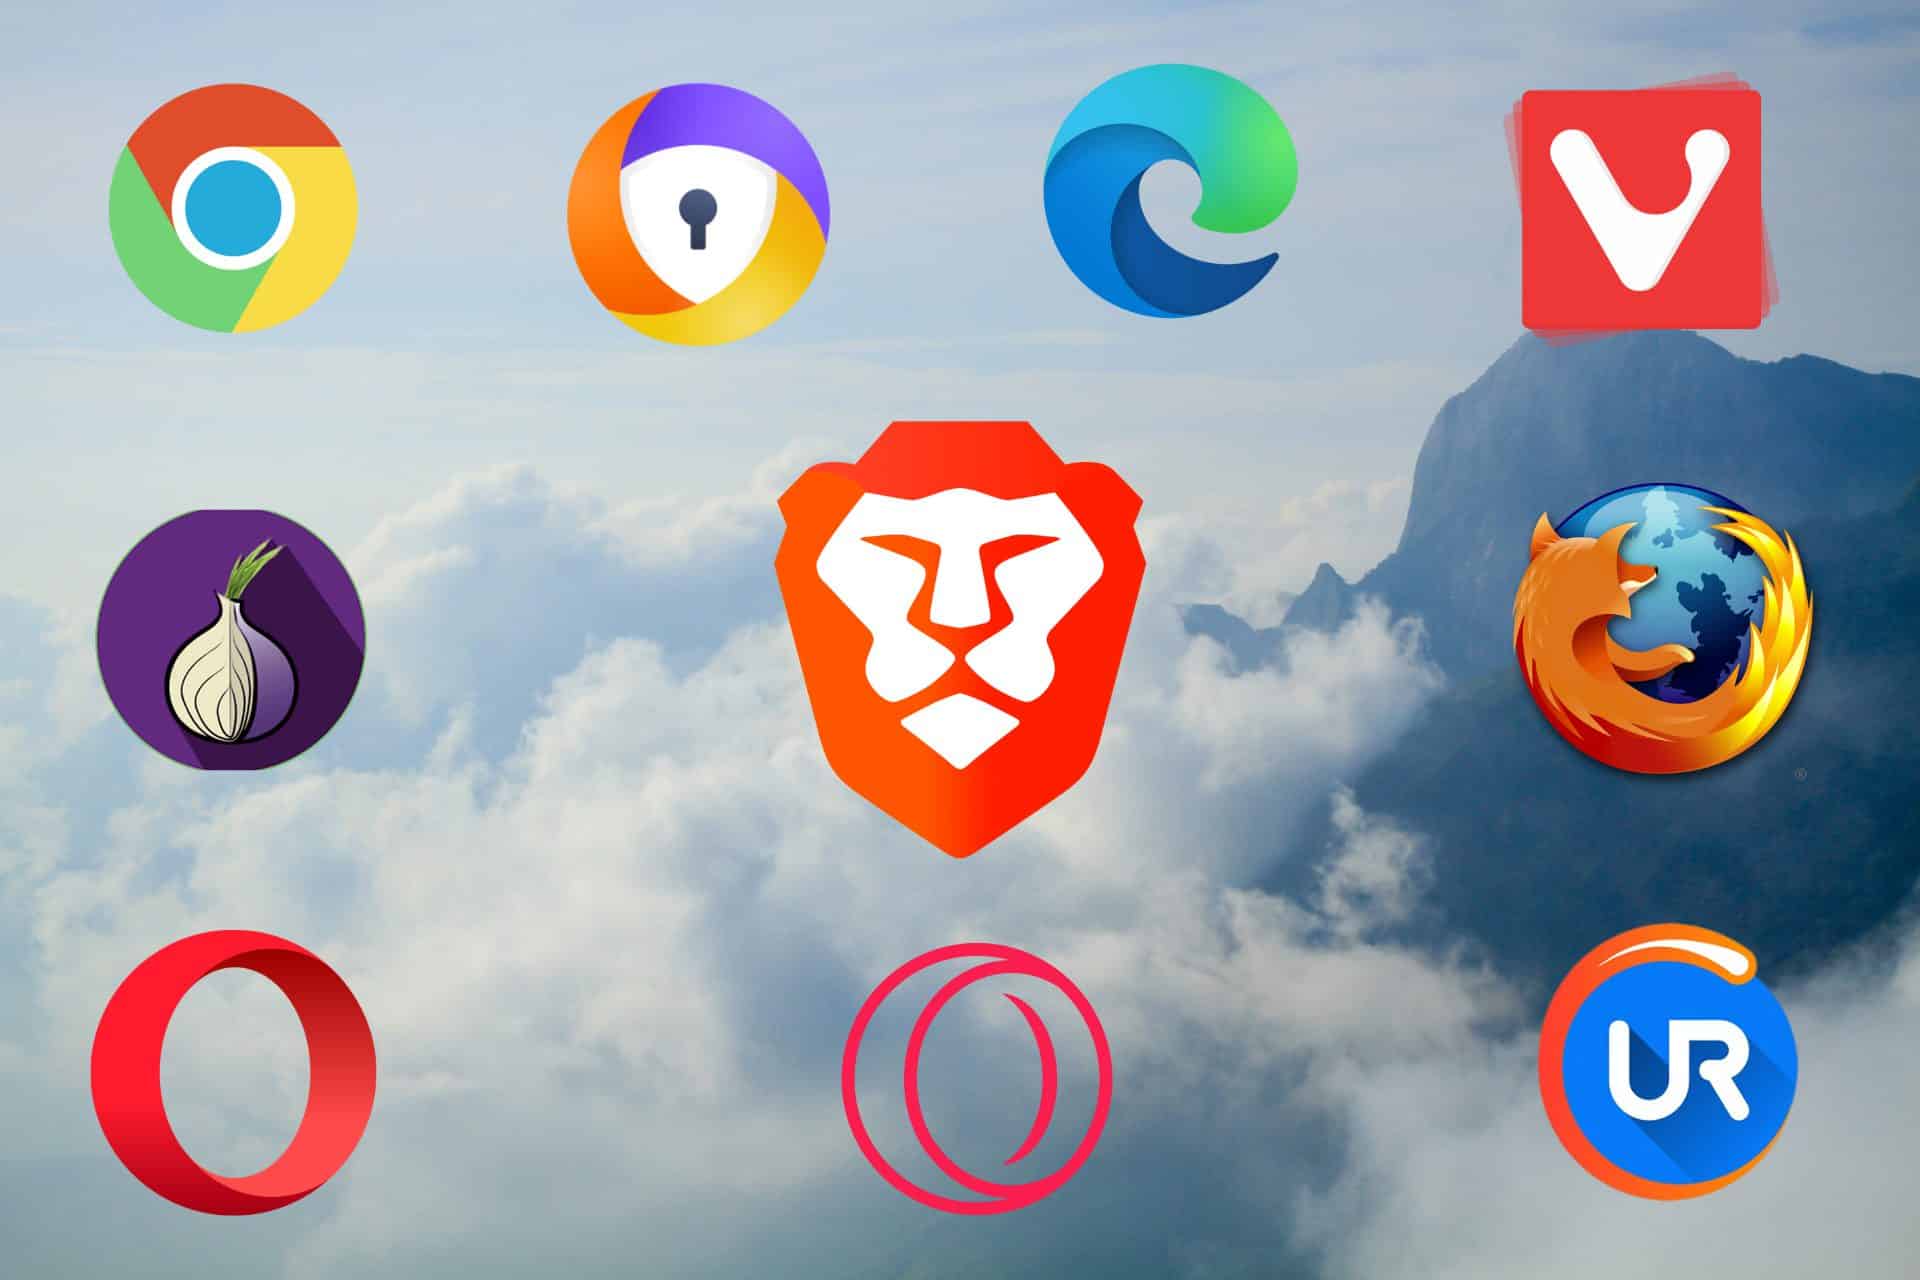 Which Web Browser Brand Identity is Superior?